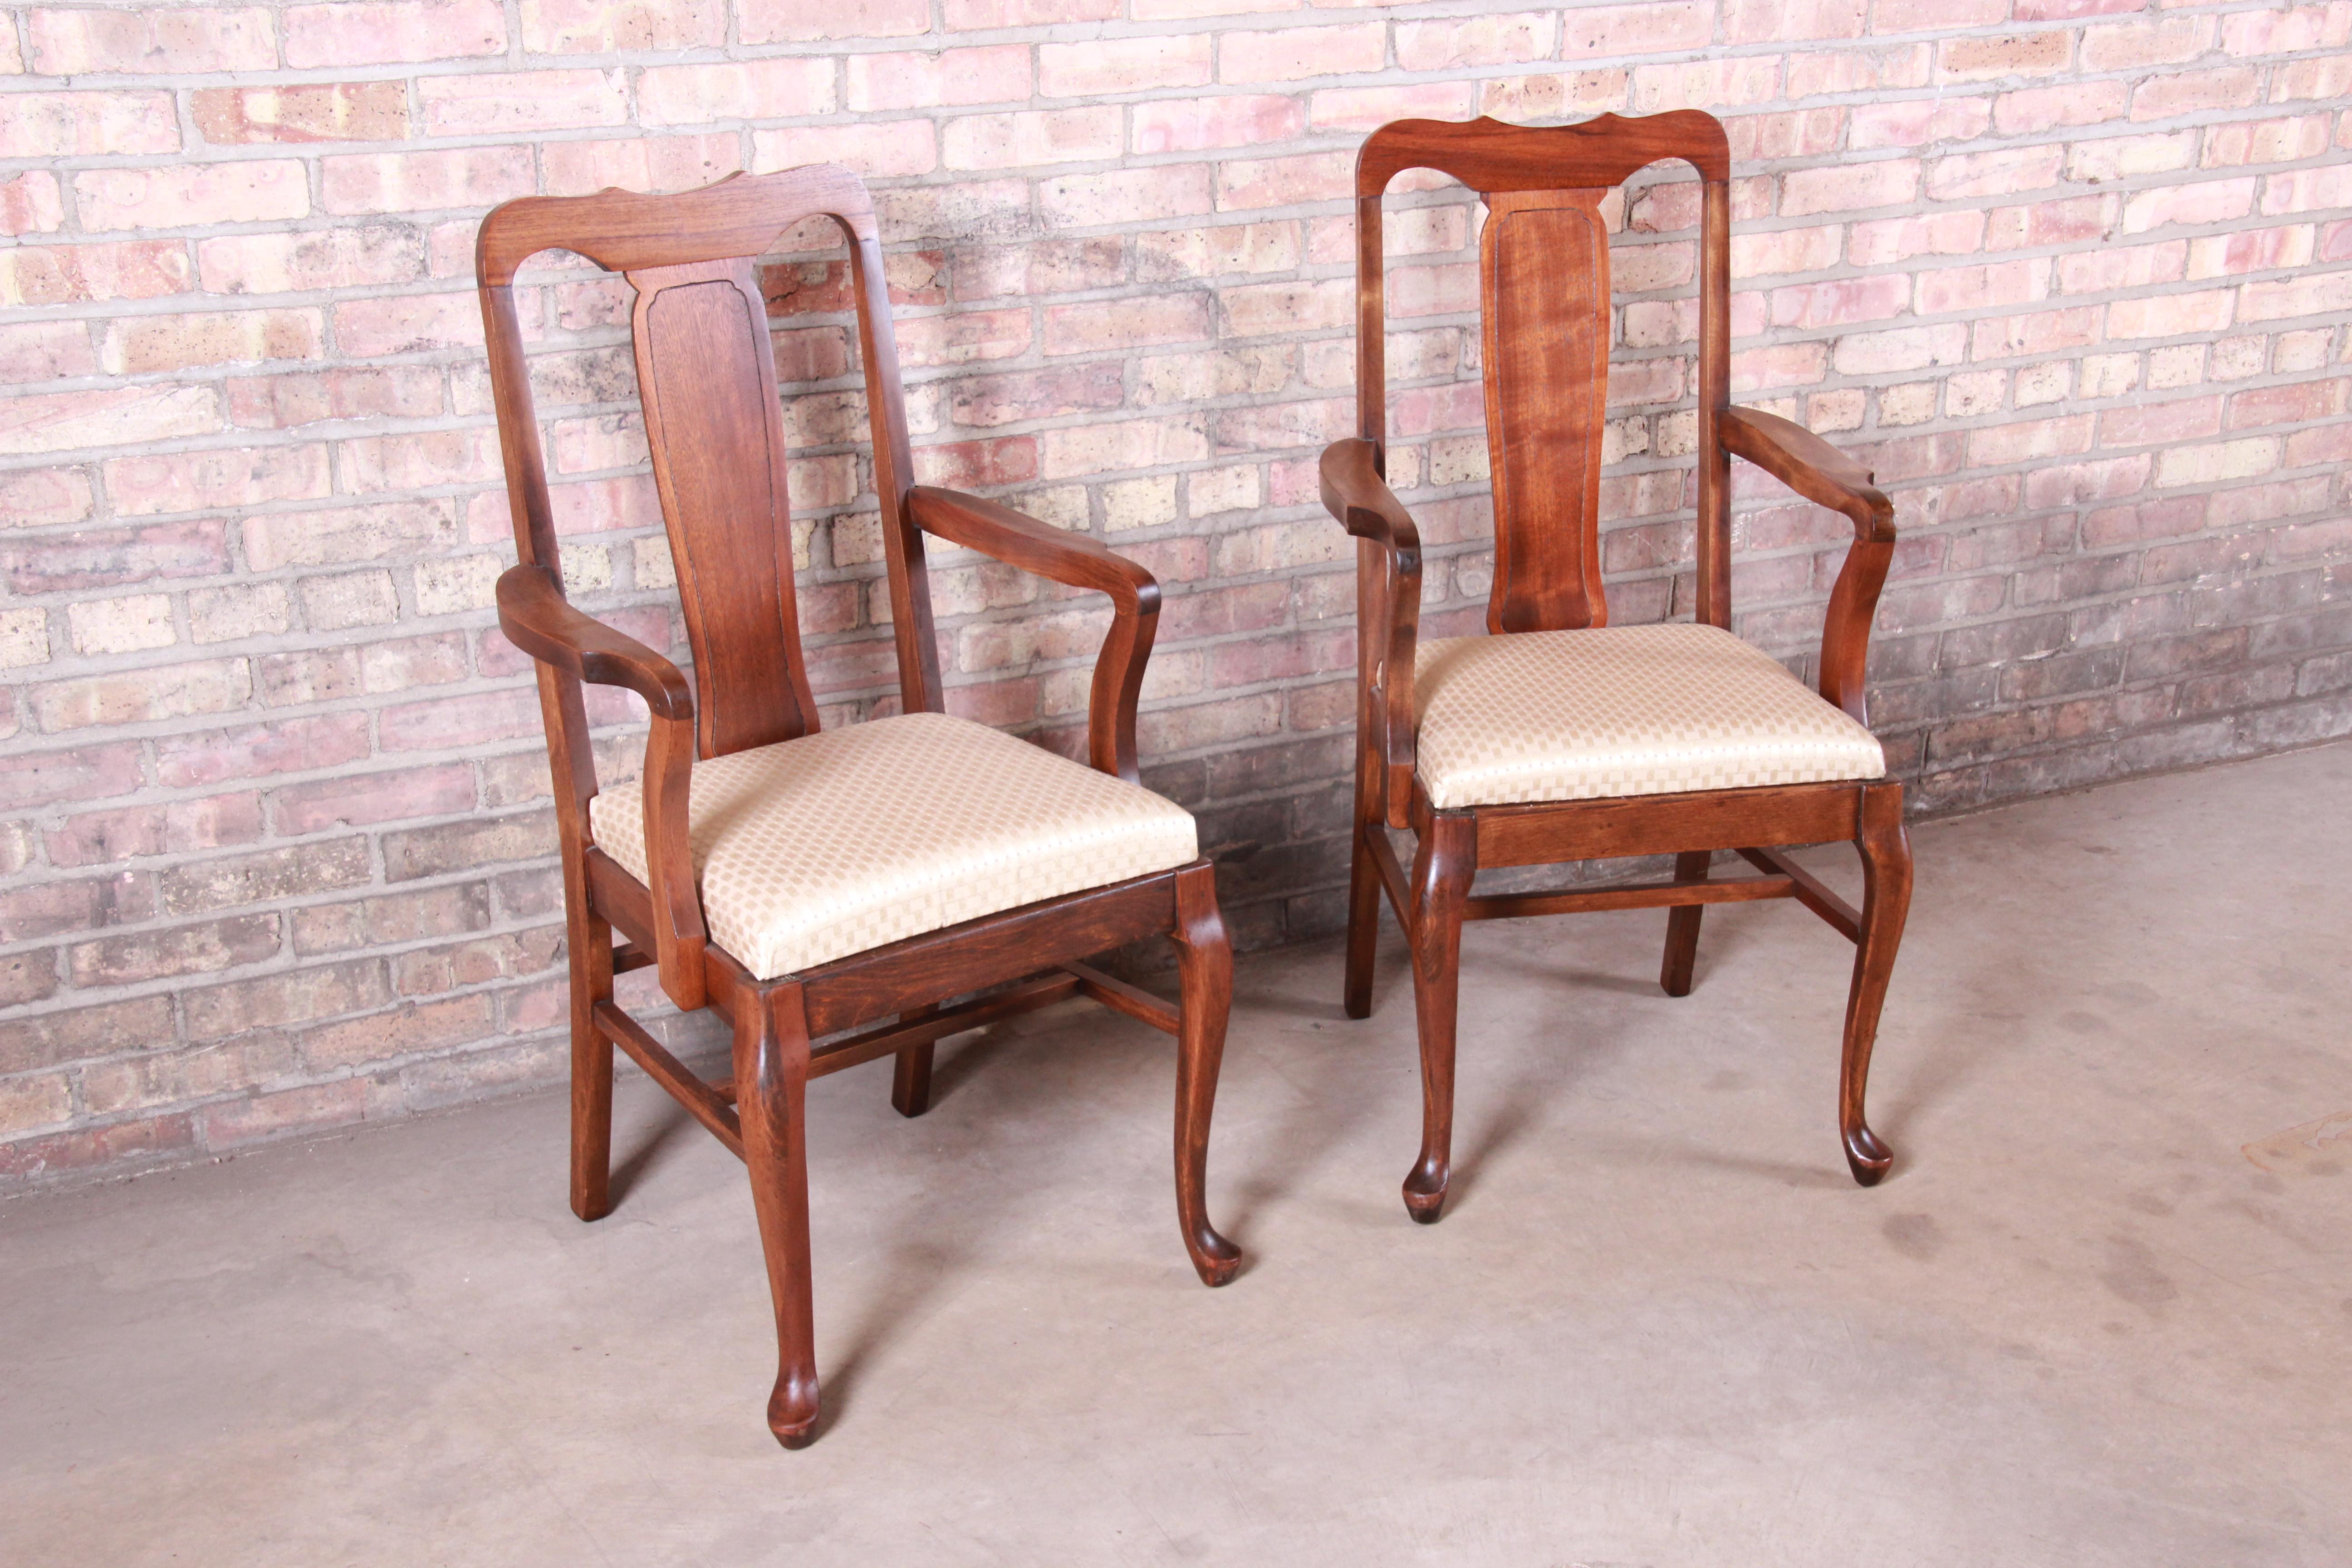 A gorgeous pair of Queen Anne mahogany armchairs. Perfect for dining captain chairs or club chairs.

Early 20th century

Measures: 22